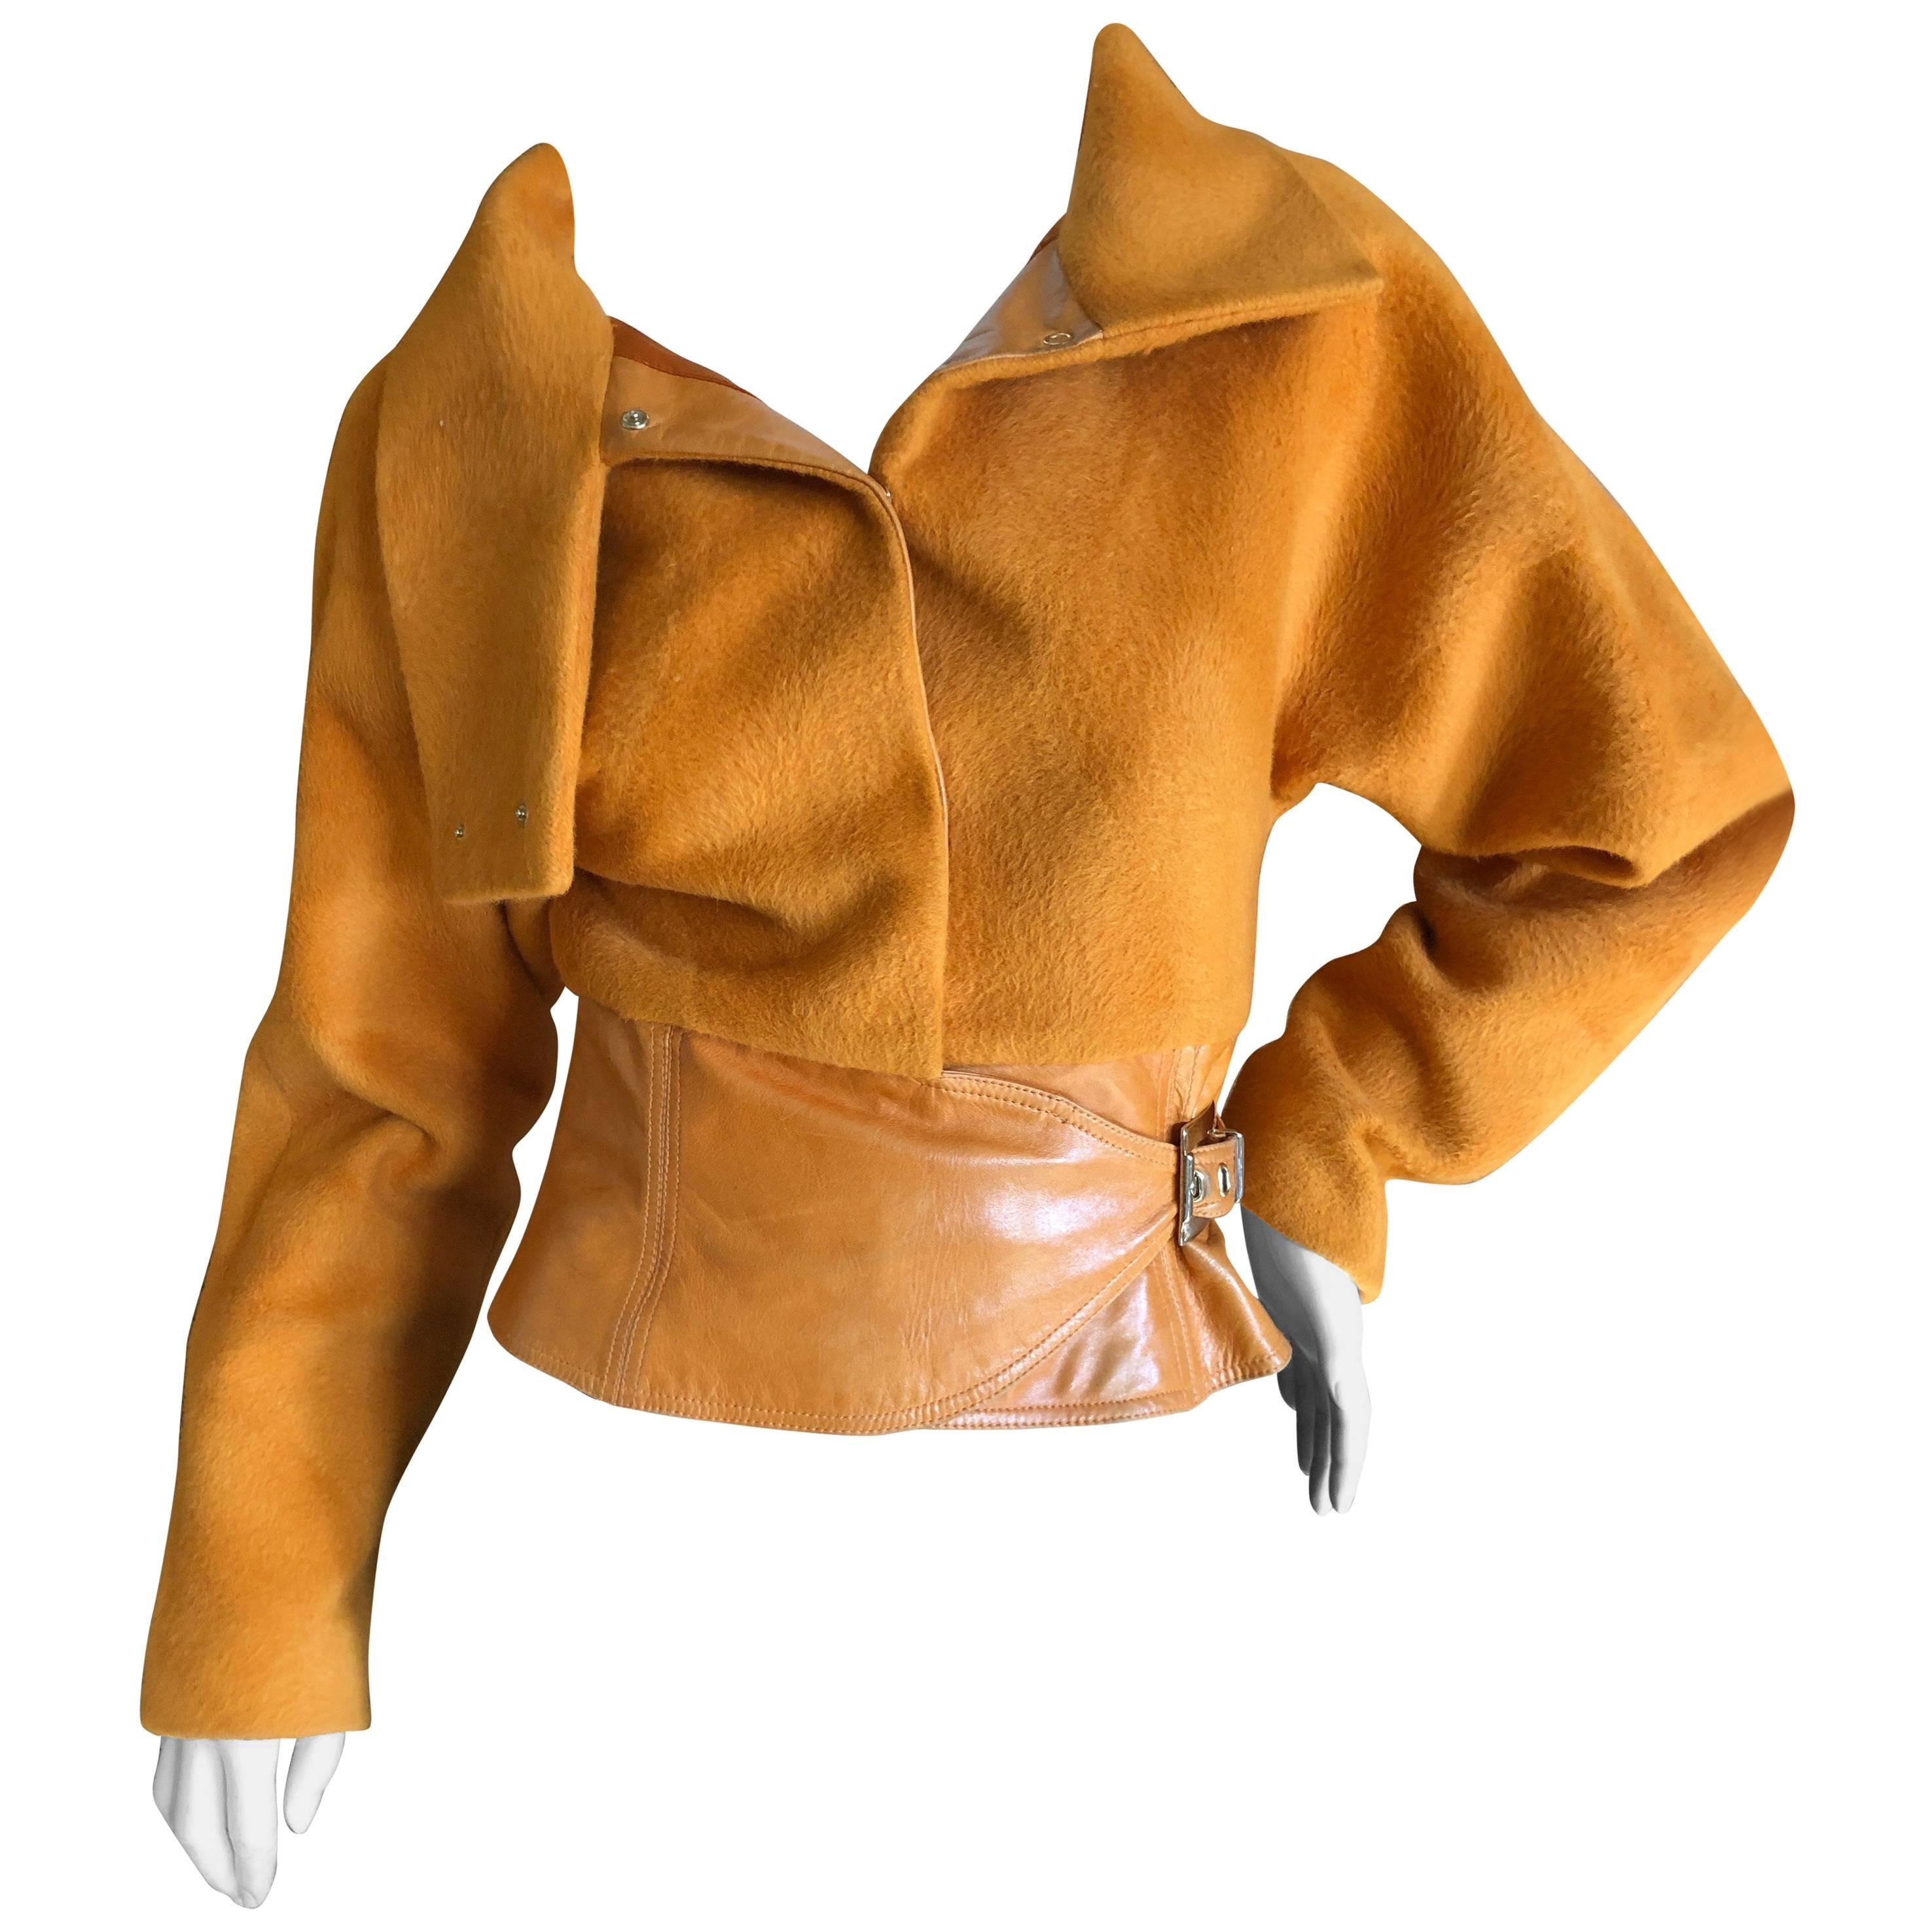 Gianni Versace Couture 1980's Luxurious Orange Wrap Jacket with Leather Trim For Sale